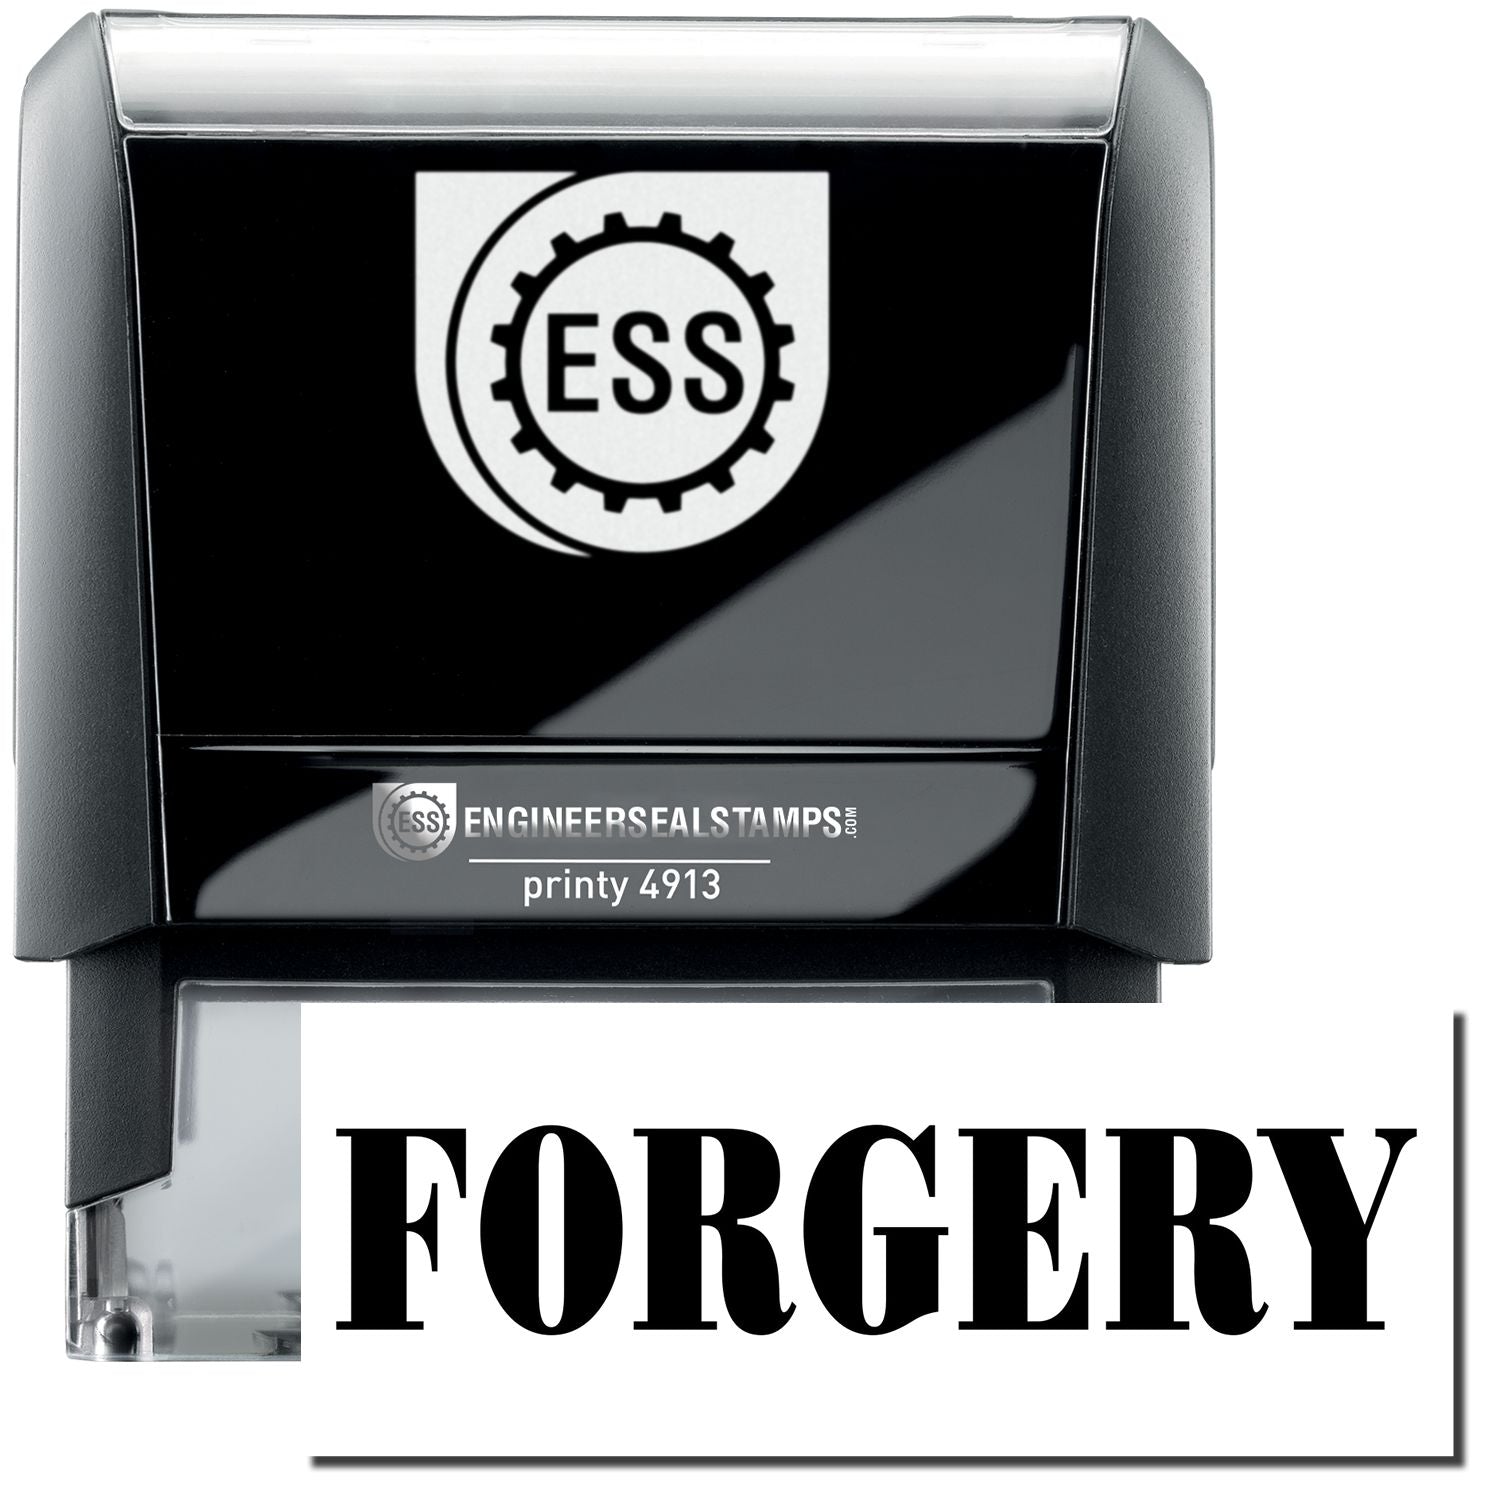 A self-inking stamp with a stamped image showing how the text "FORGERY" in a large bold font is displayed by it.